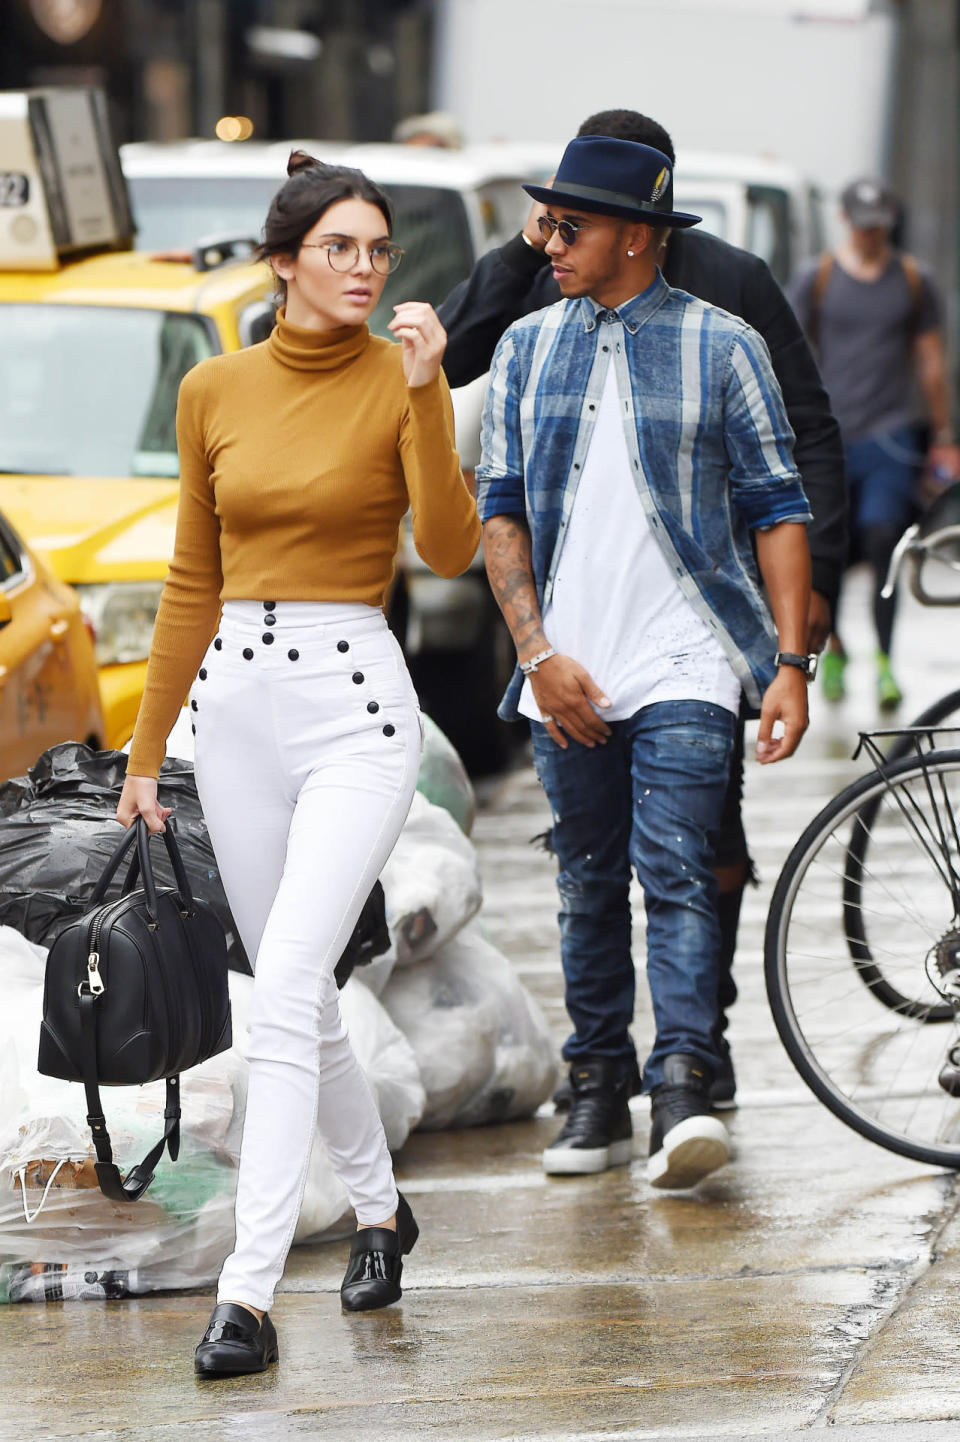 <p>Jenner looked fabulously four-eyed in round glasses, high-waisted white pants, and a mustard-colored turtle neck in New York City. She completed the casual look with her favorite black Givenchy tote (duh) and flats. </p>